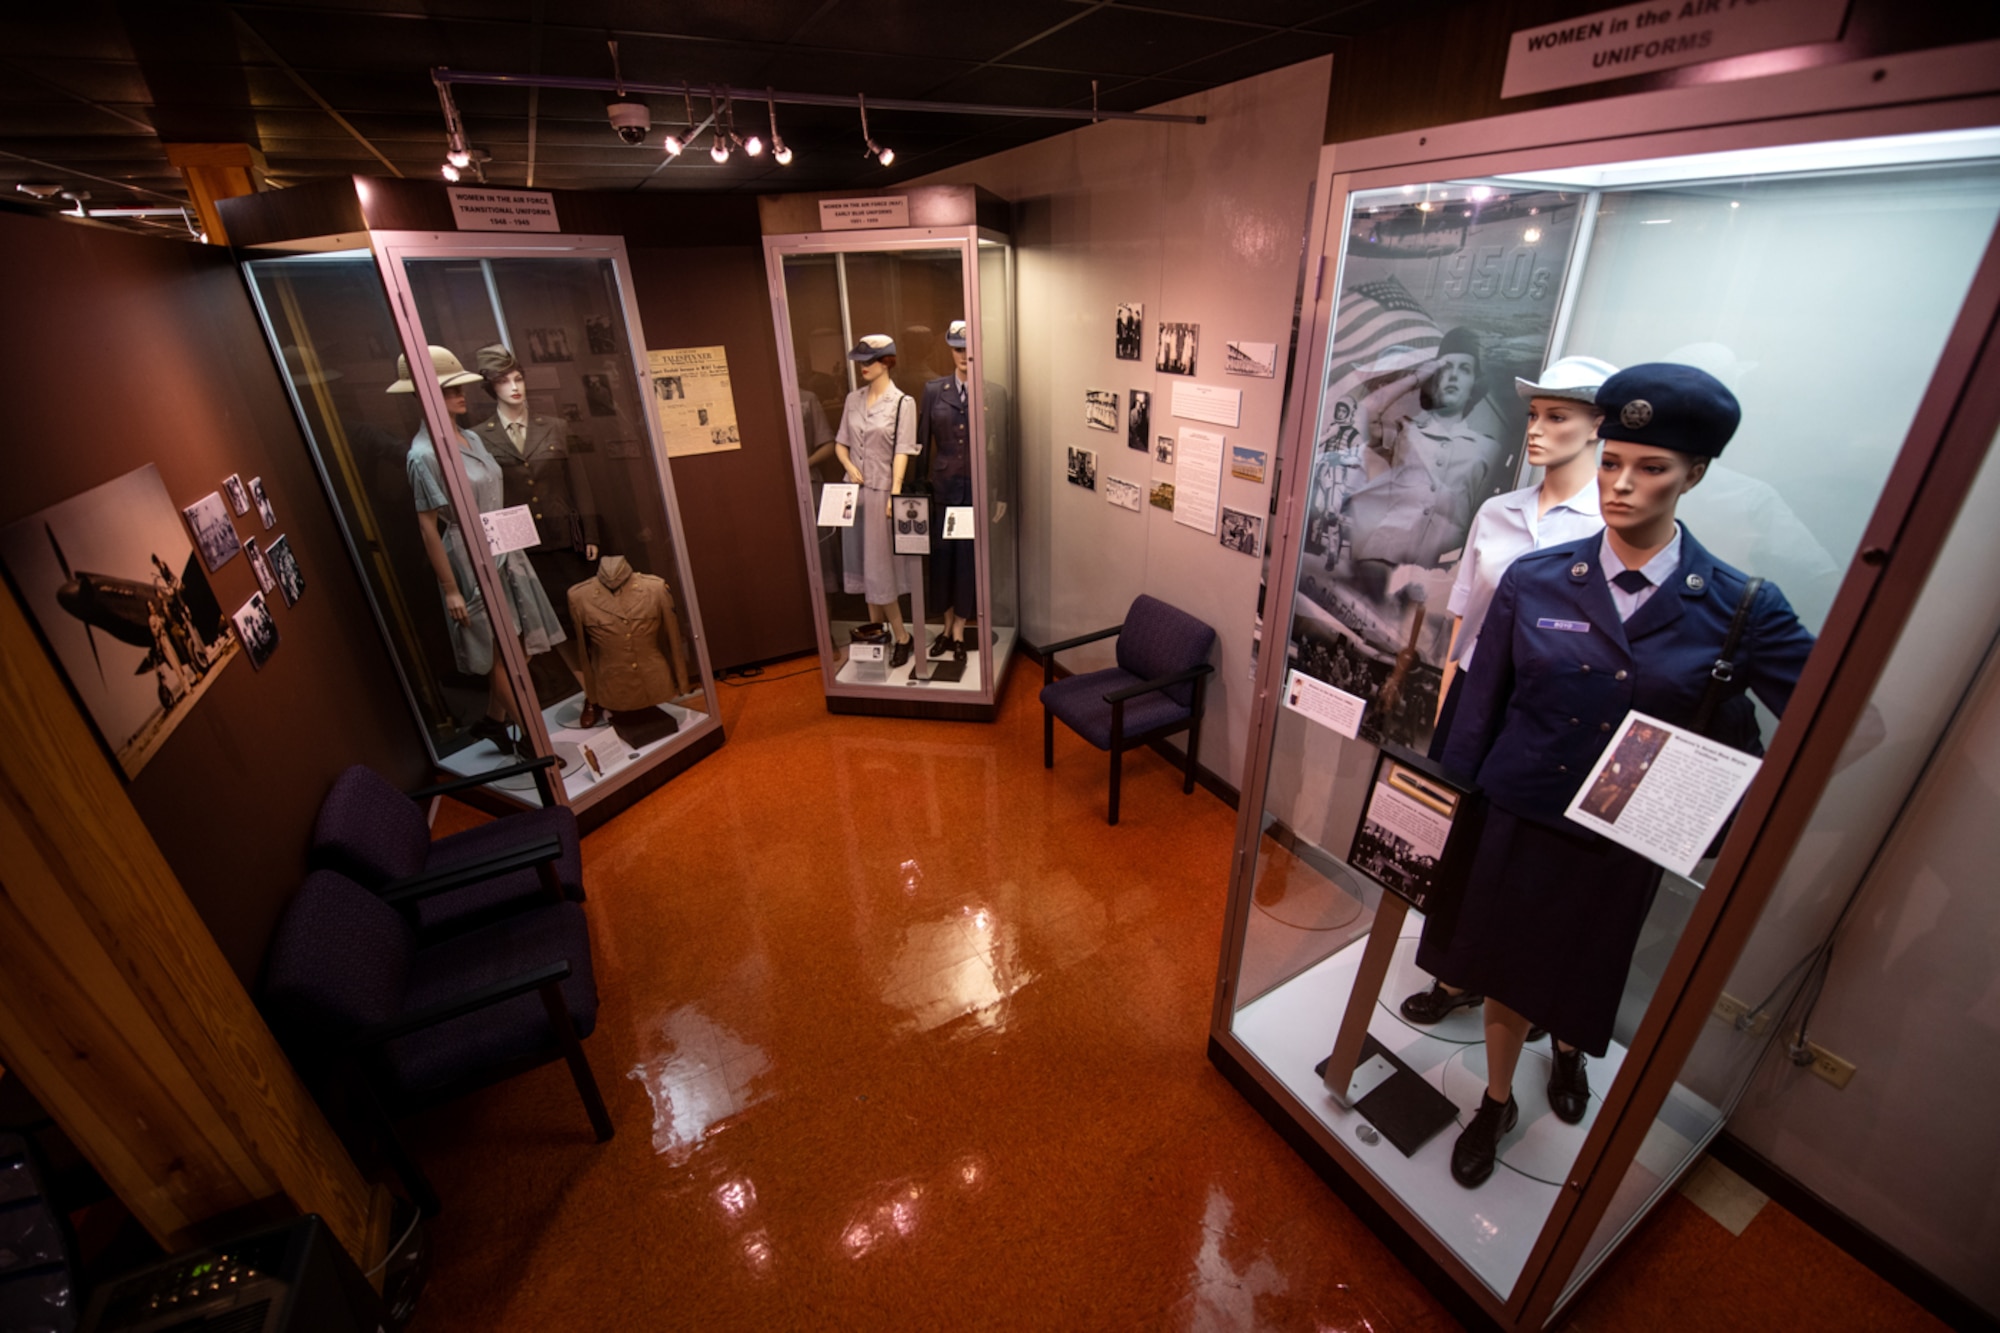 The WAF gallery consists of mannequins dressed in various WAF uniforms from the 40s through the 80s, photos and artifacts.